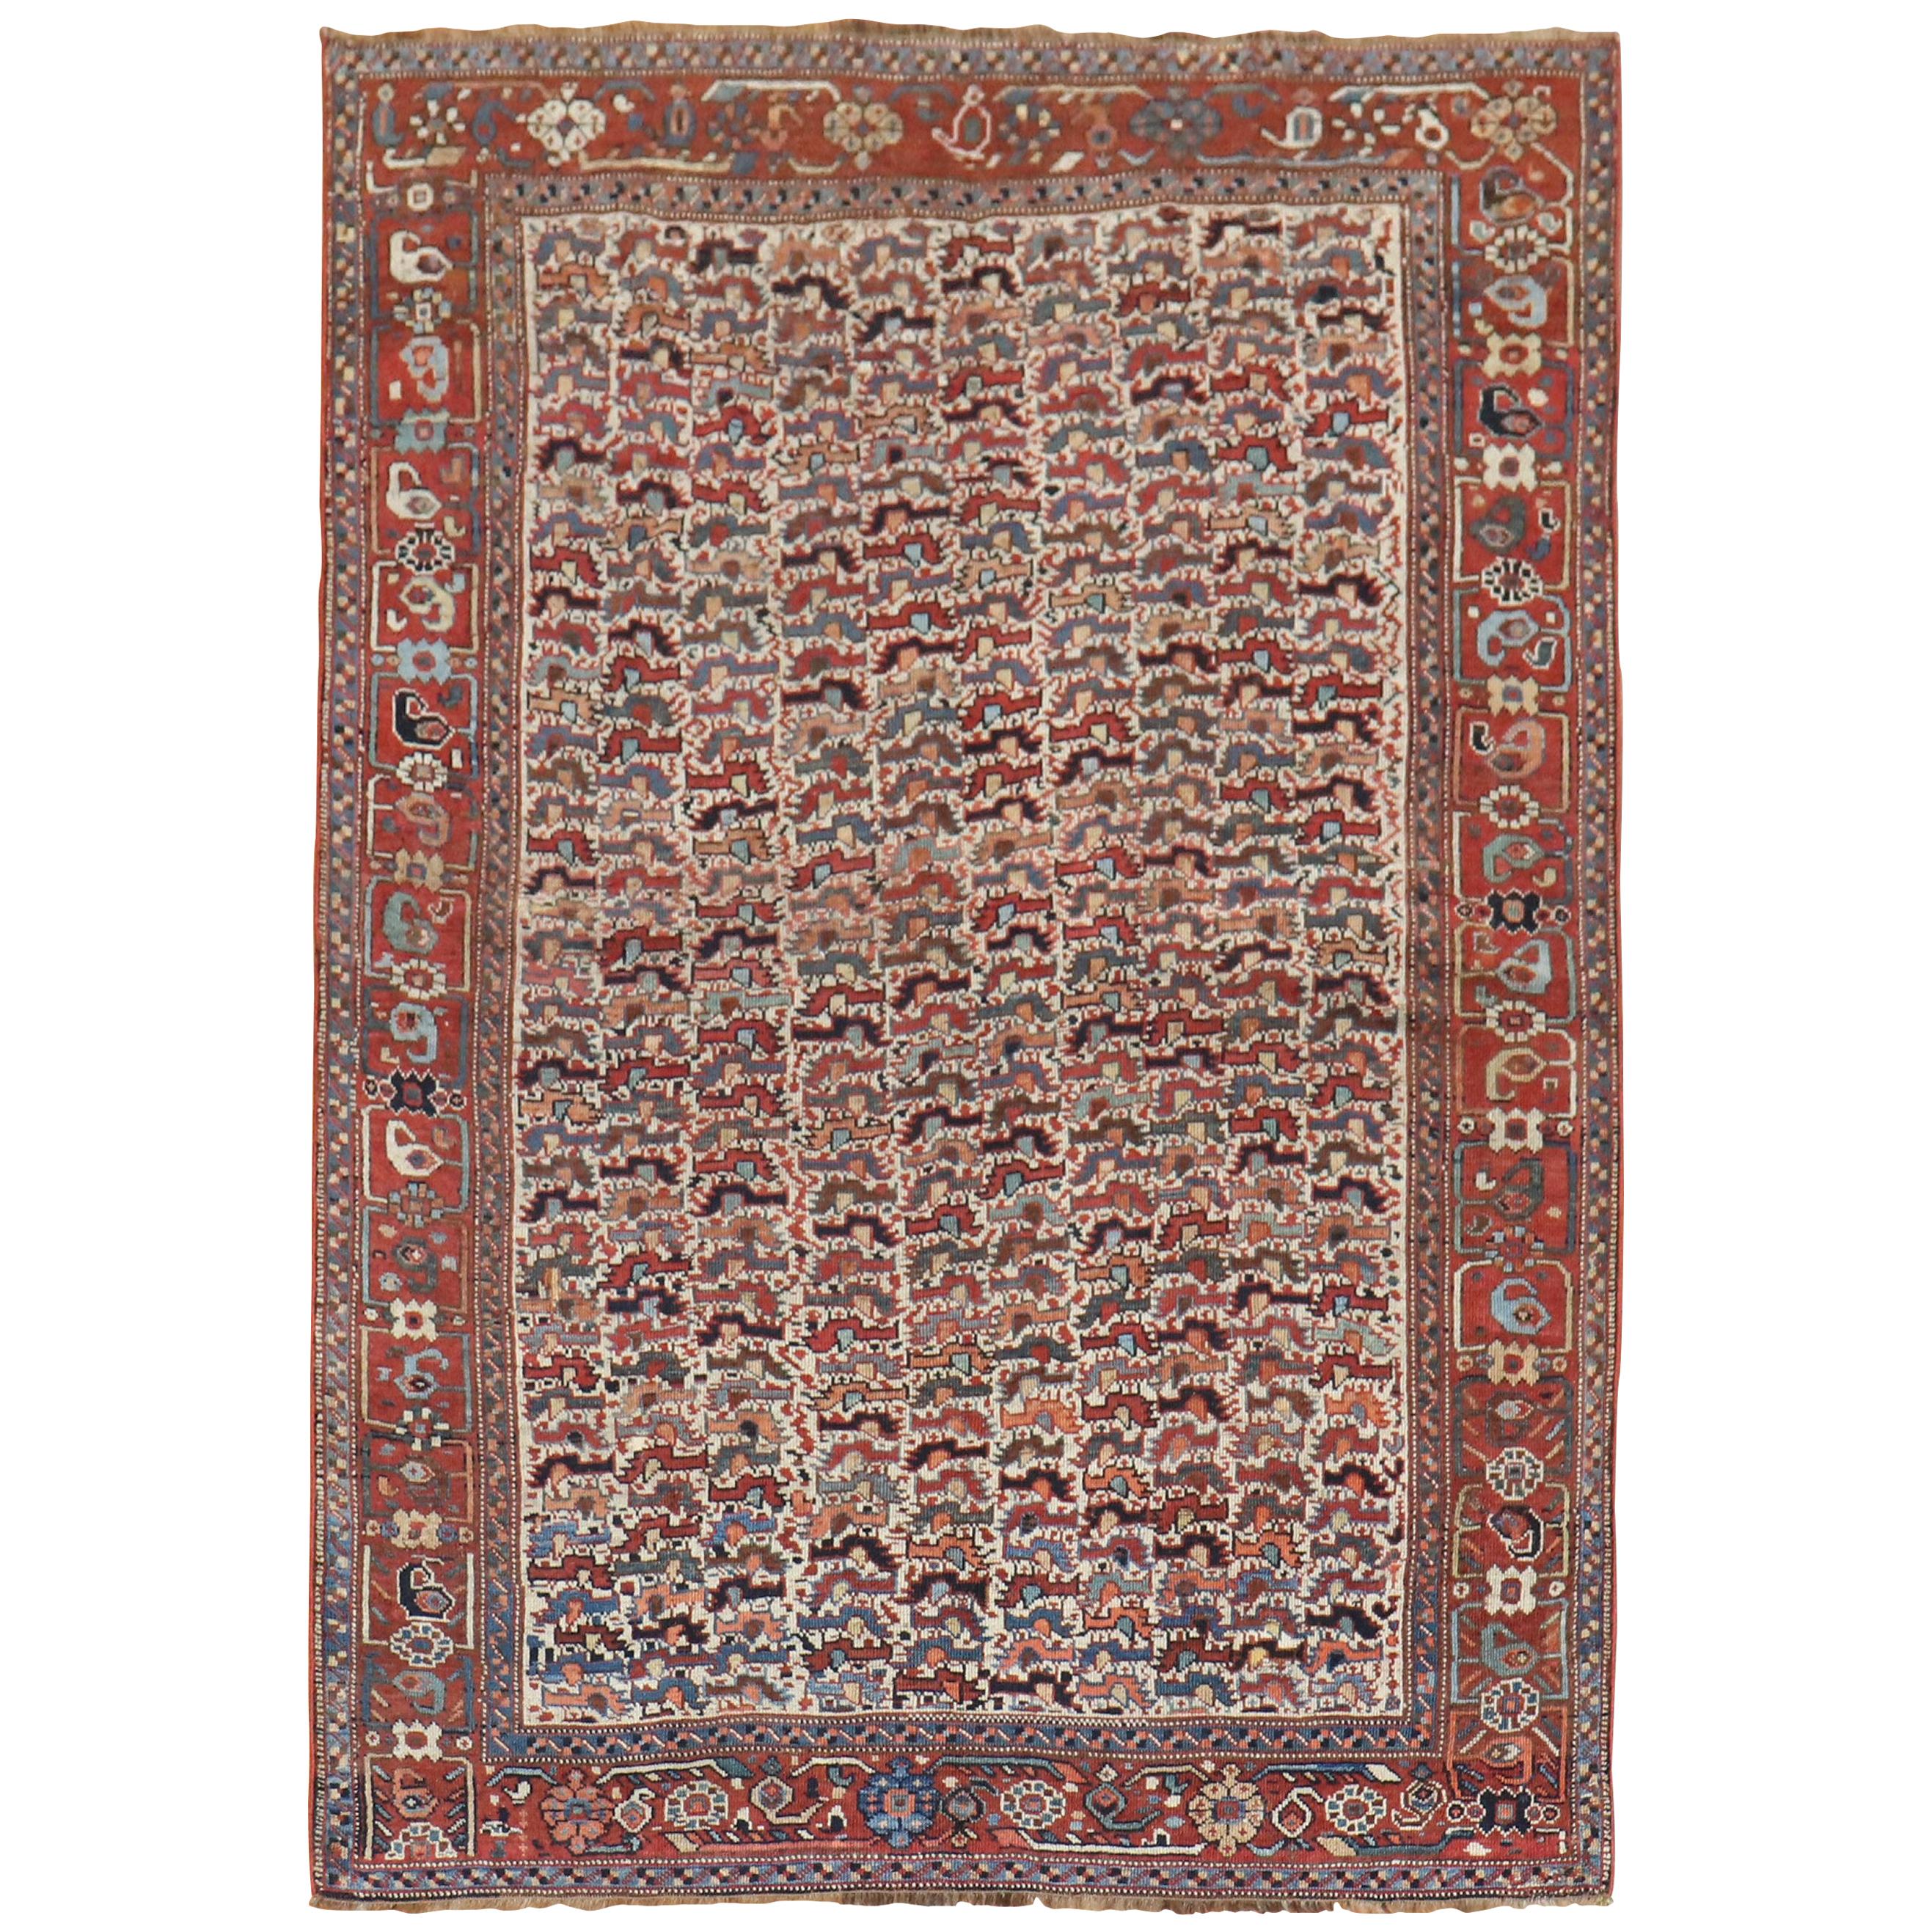 Tribal Chicken Motif Rustic Persian Afshar Accent Rug, Early 20th Century